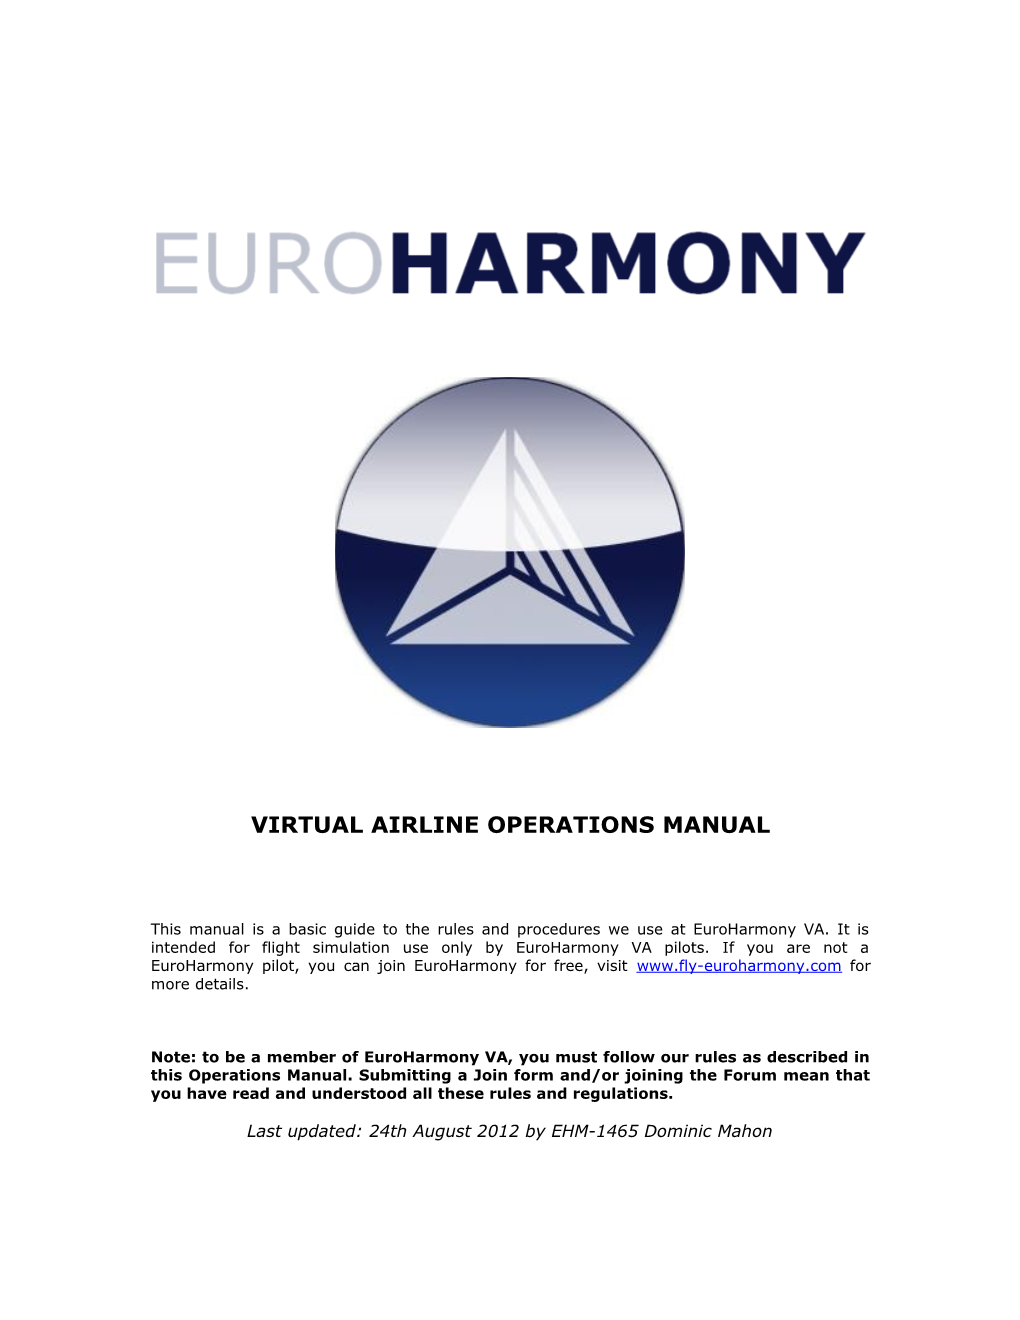 Virtual Airline Operations Manual